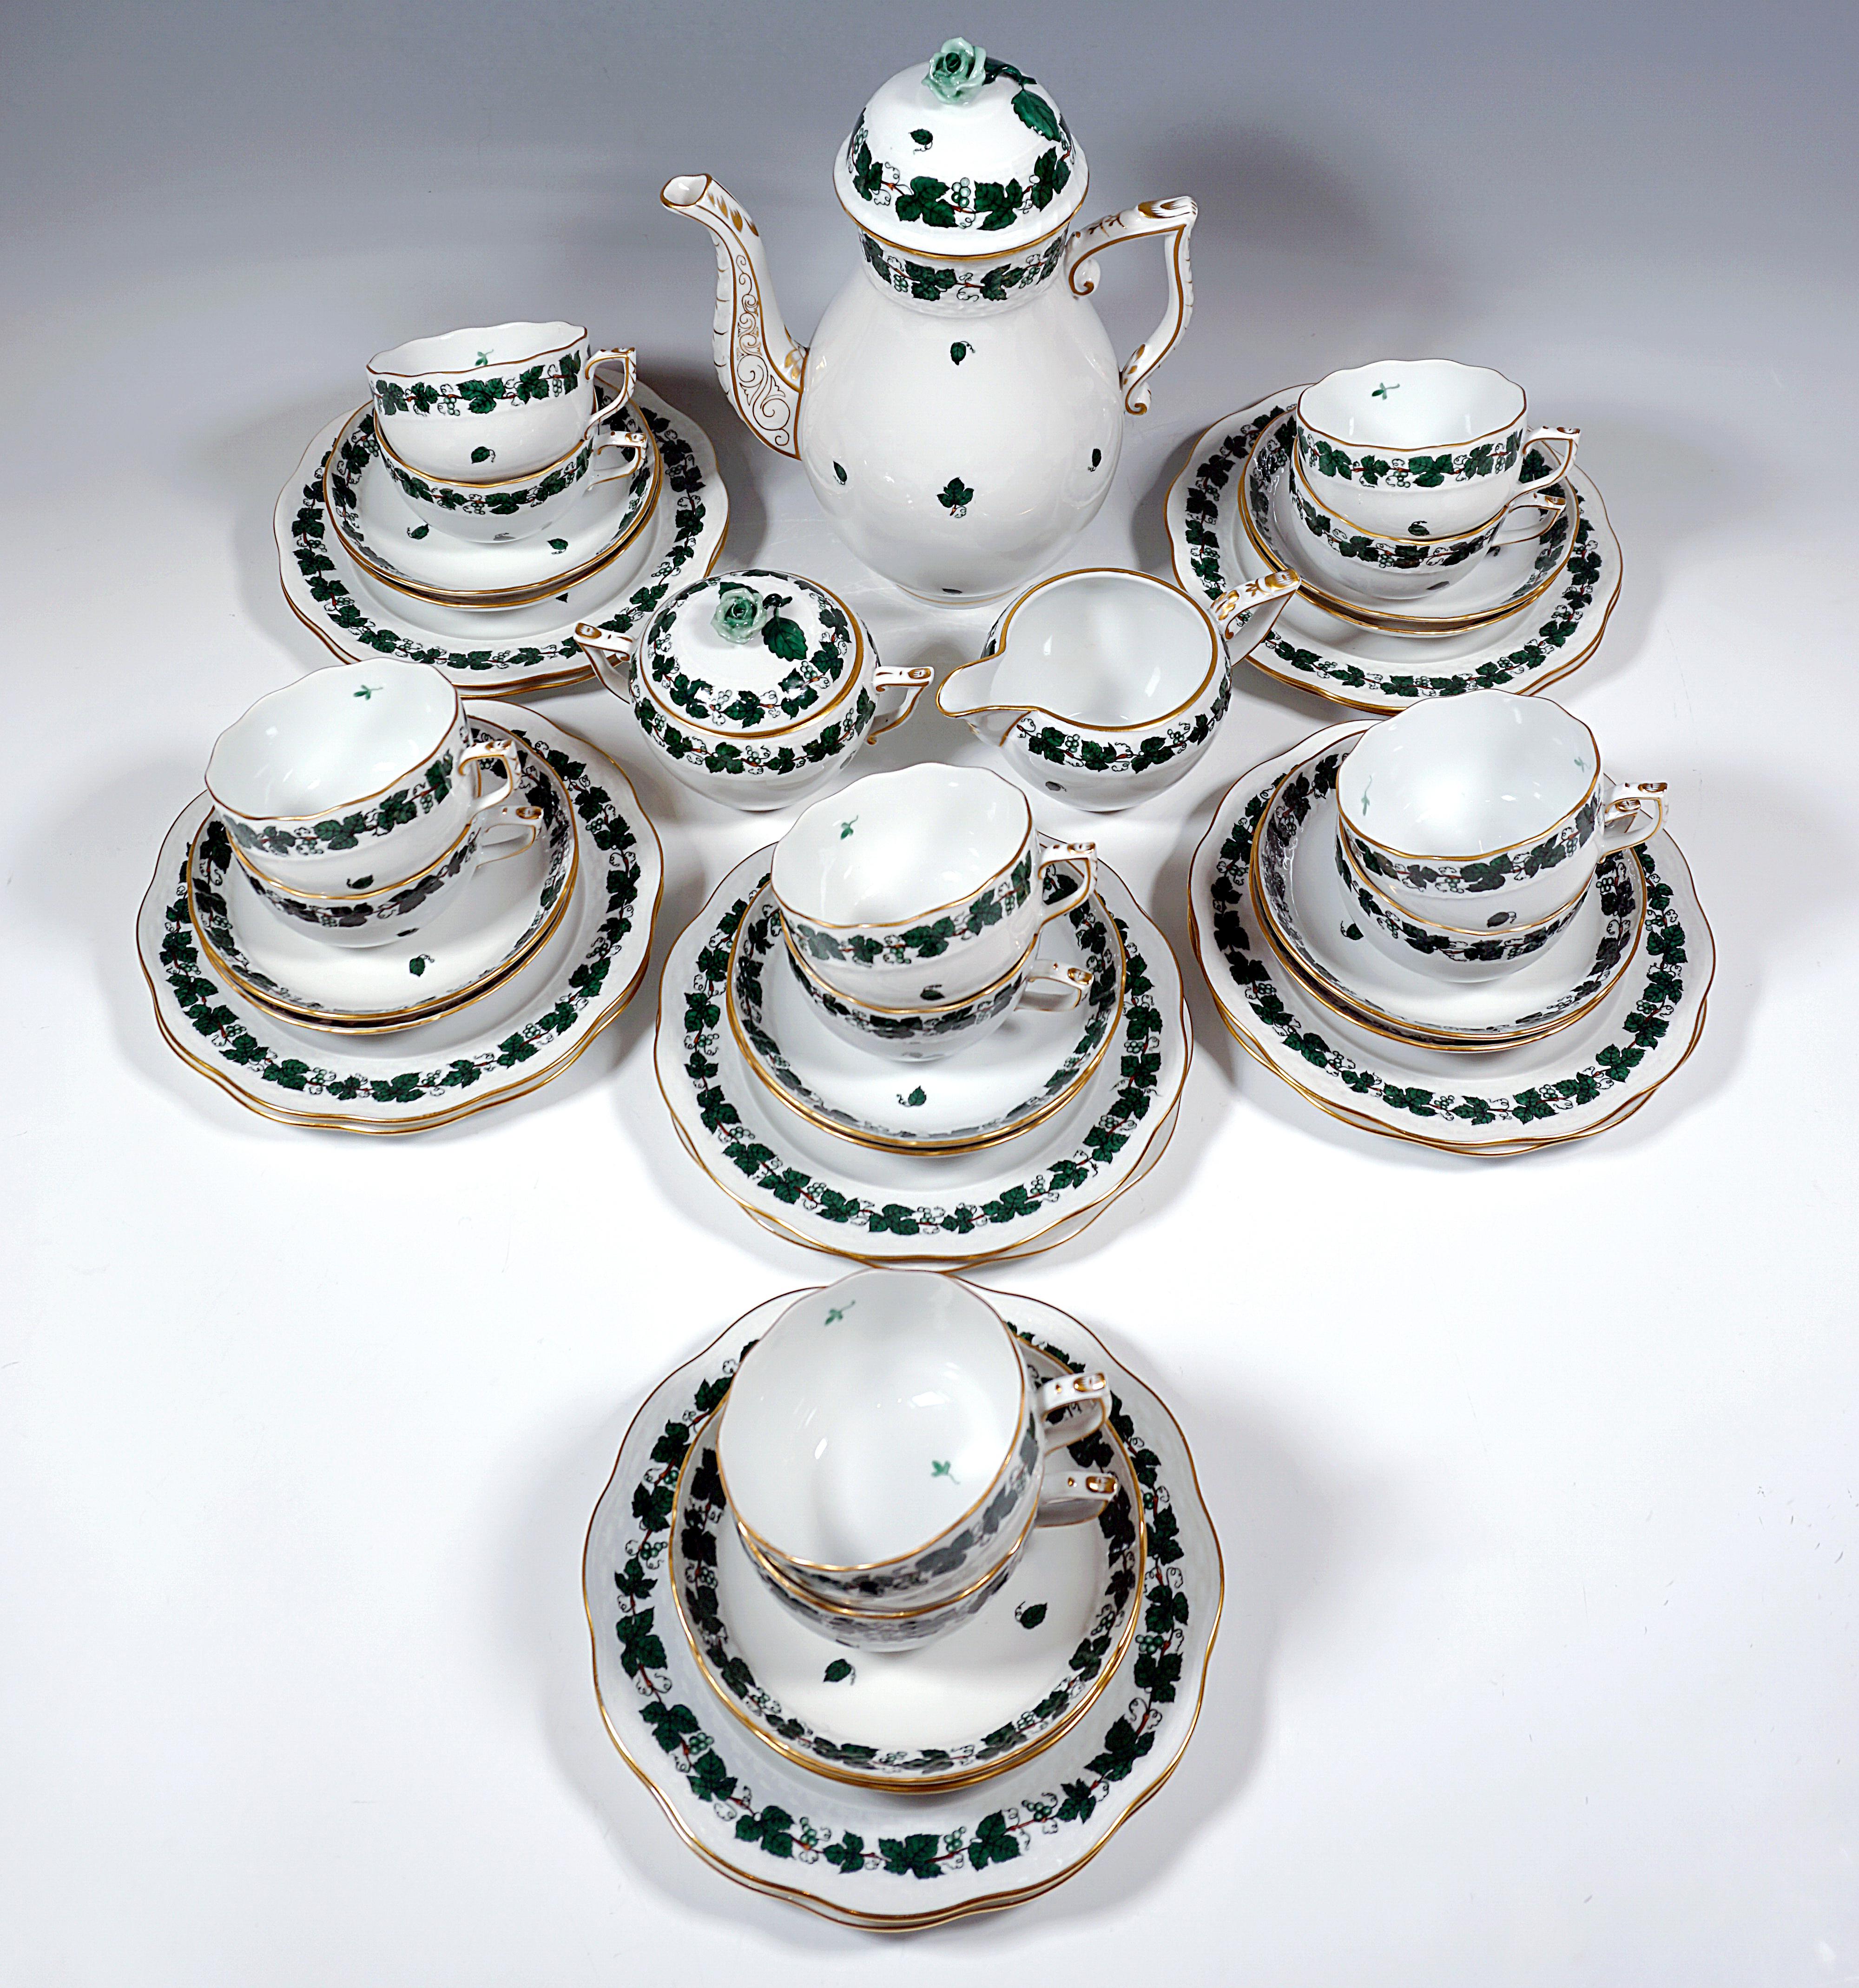 Herend service consisting of 39 parts: coffee pot with lid, milk jug, sugar bowl, twelve cups, twelve saucers and twelve dessert plates.
Decor: VSZG-3 - vine leaf tendrils with gold decoration.

Manufactory: Herend Hungary
Date of manufacture: